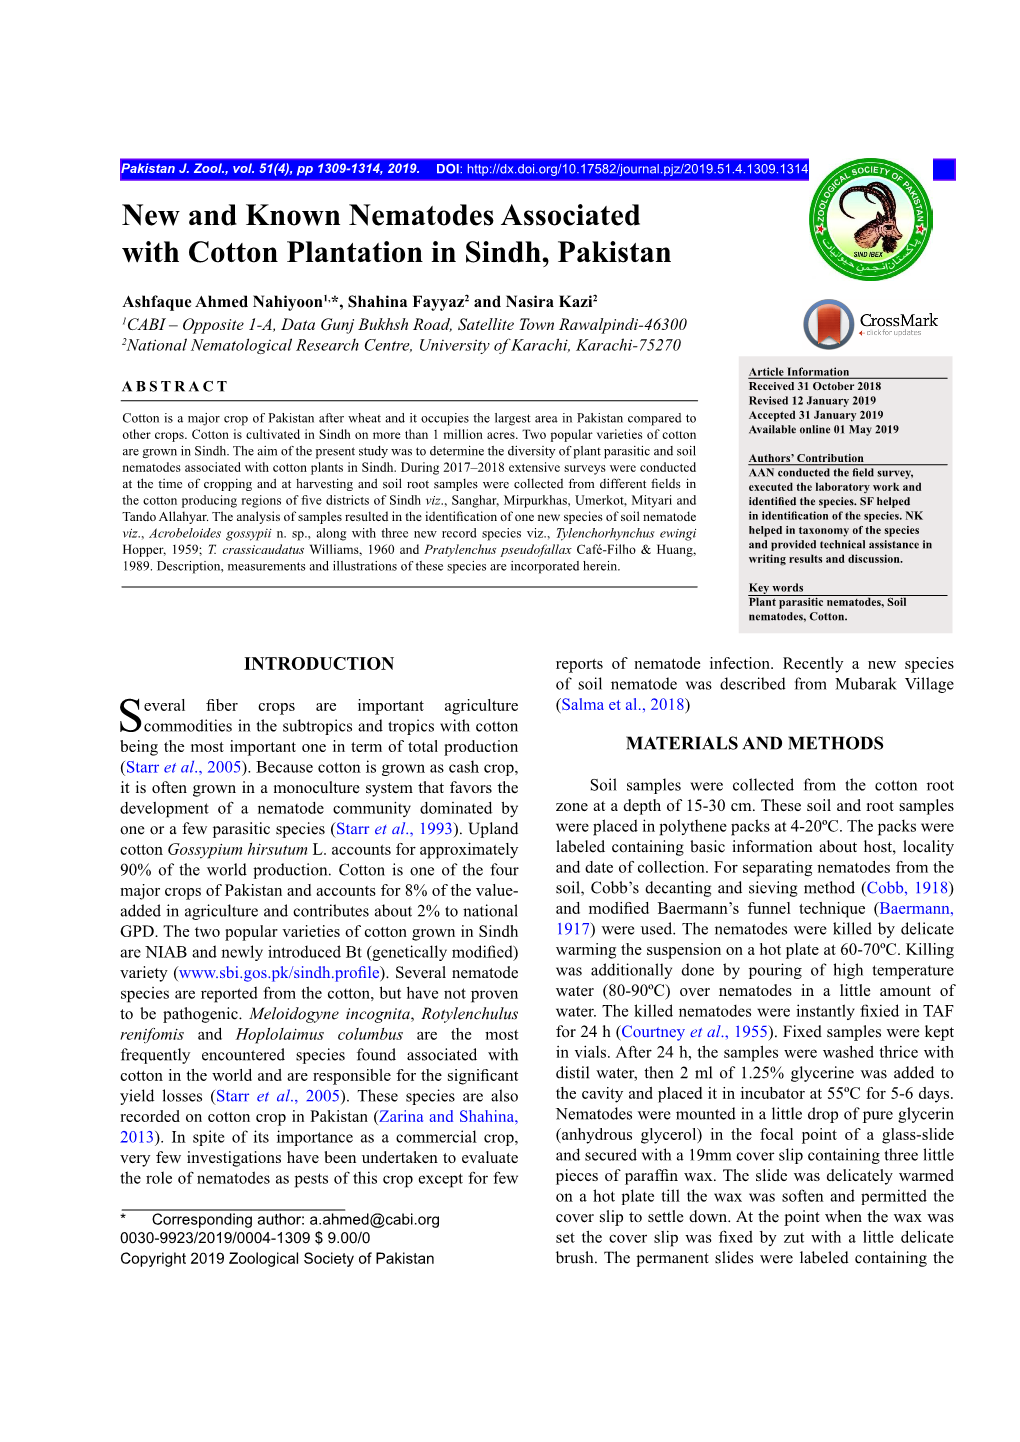 New and Known Nematodes Associated with Cotton Plantation in Sindh, Pakistan